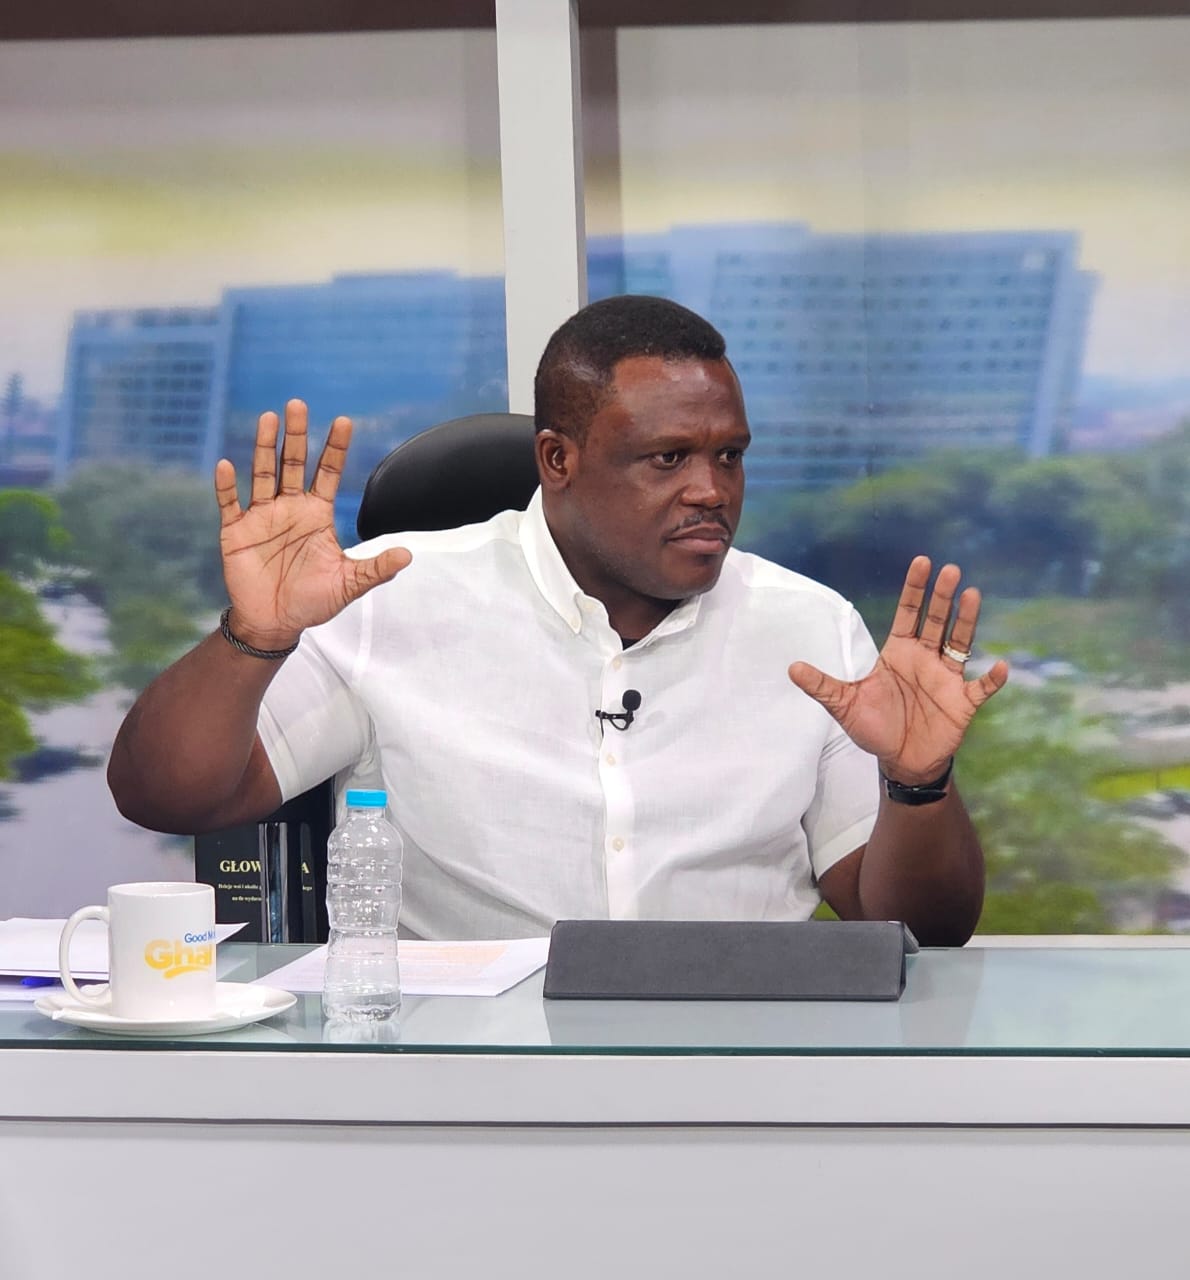 Mahama is in “safe pair of hands” to run Ghana – Sam George